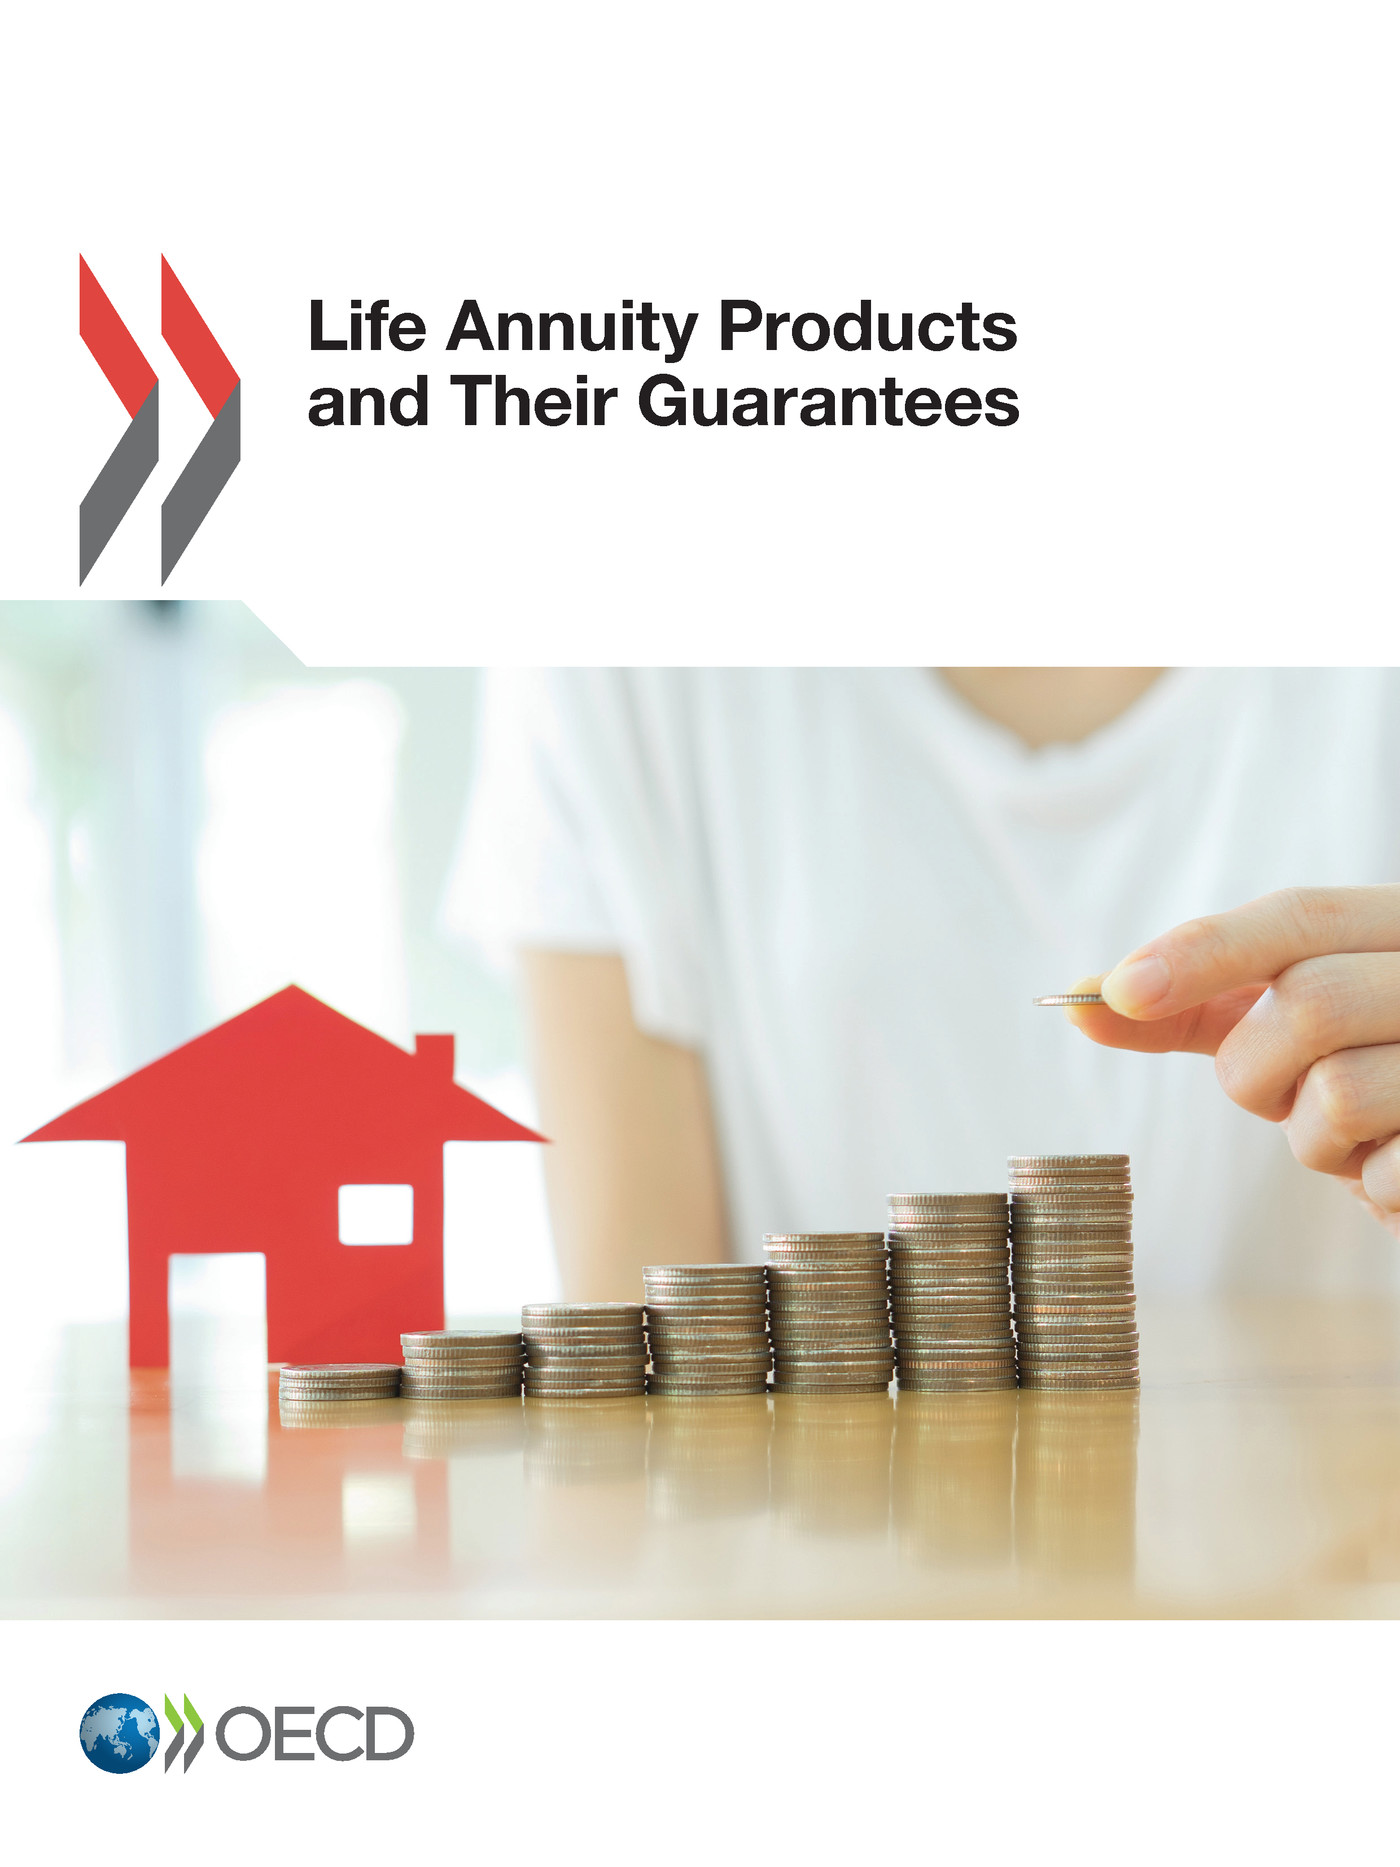 Life Annuity Products and Their Guarantees -  Collectif - OCDE / OECD